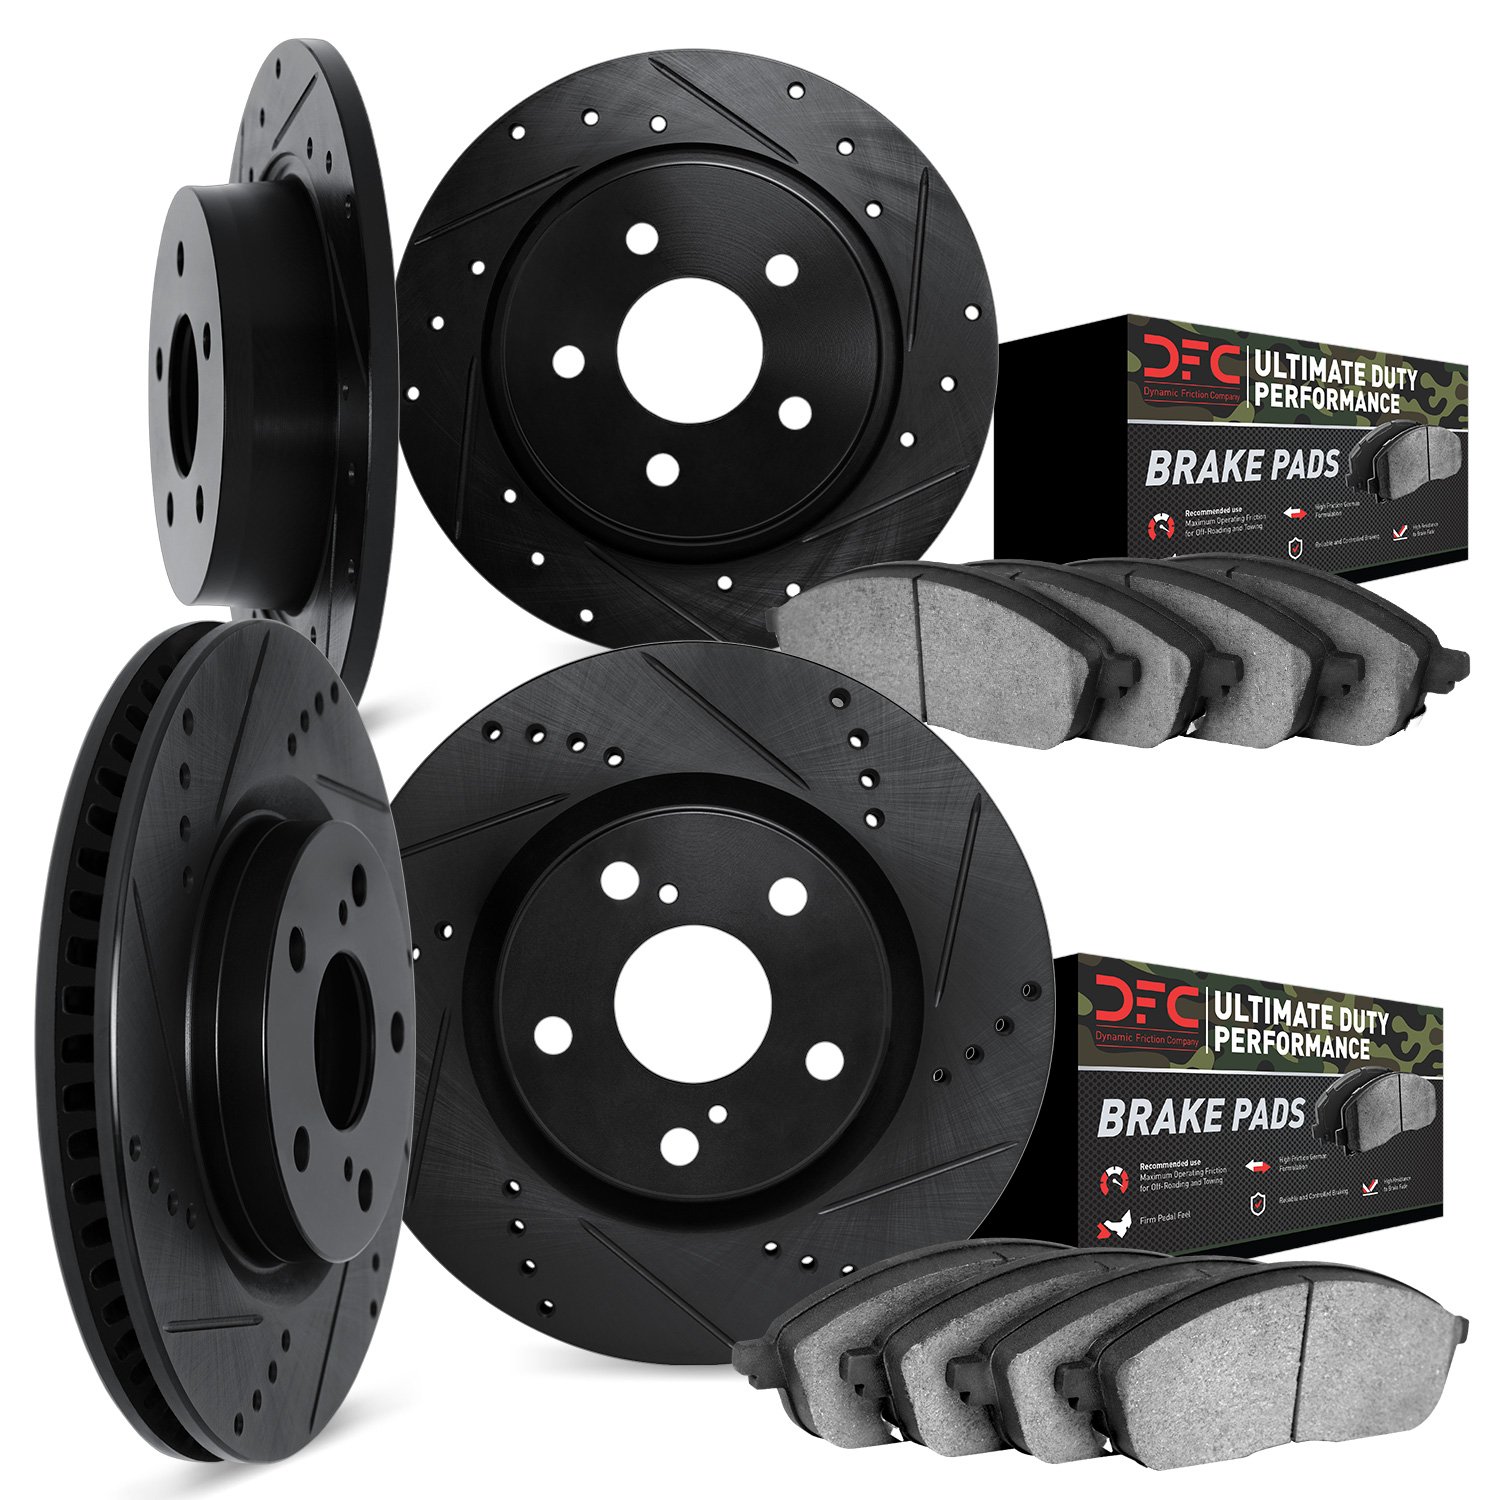 8404-54025 Drilled/Slotted Brake Rotors with Ultimate-Duty Brake Pads Kit [Black], 1999-2004 Ford/Lincoln/Mercury/Mazda, Positio